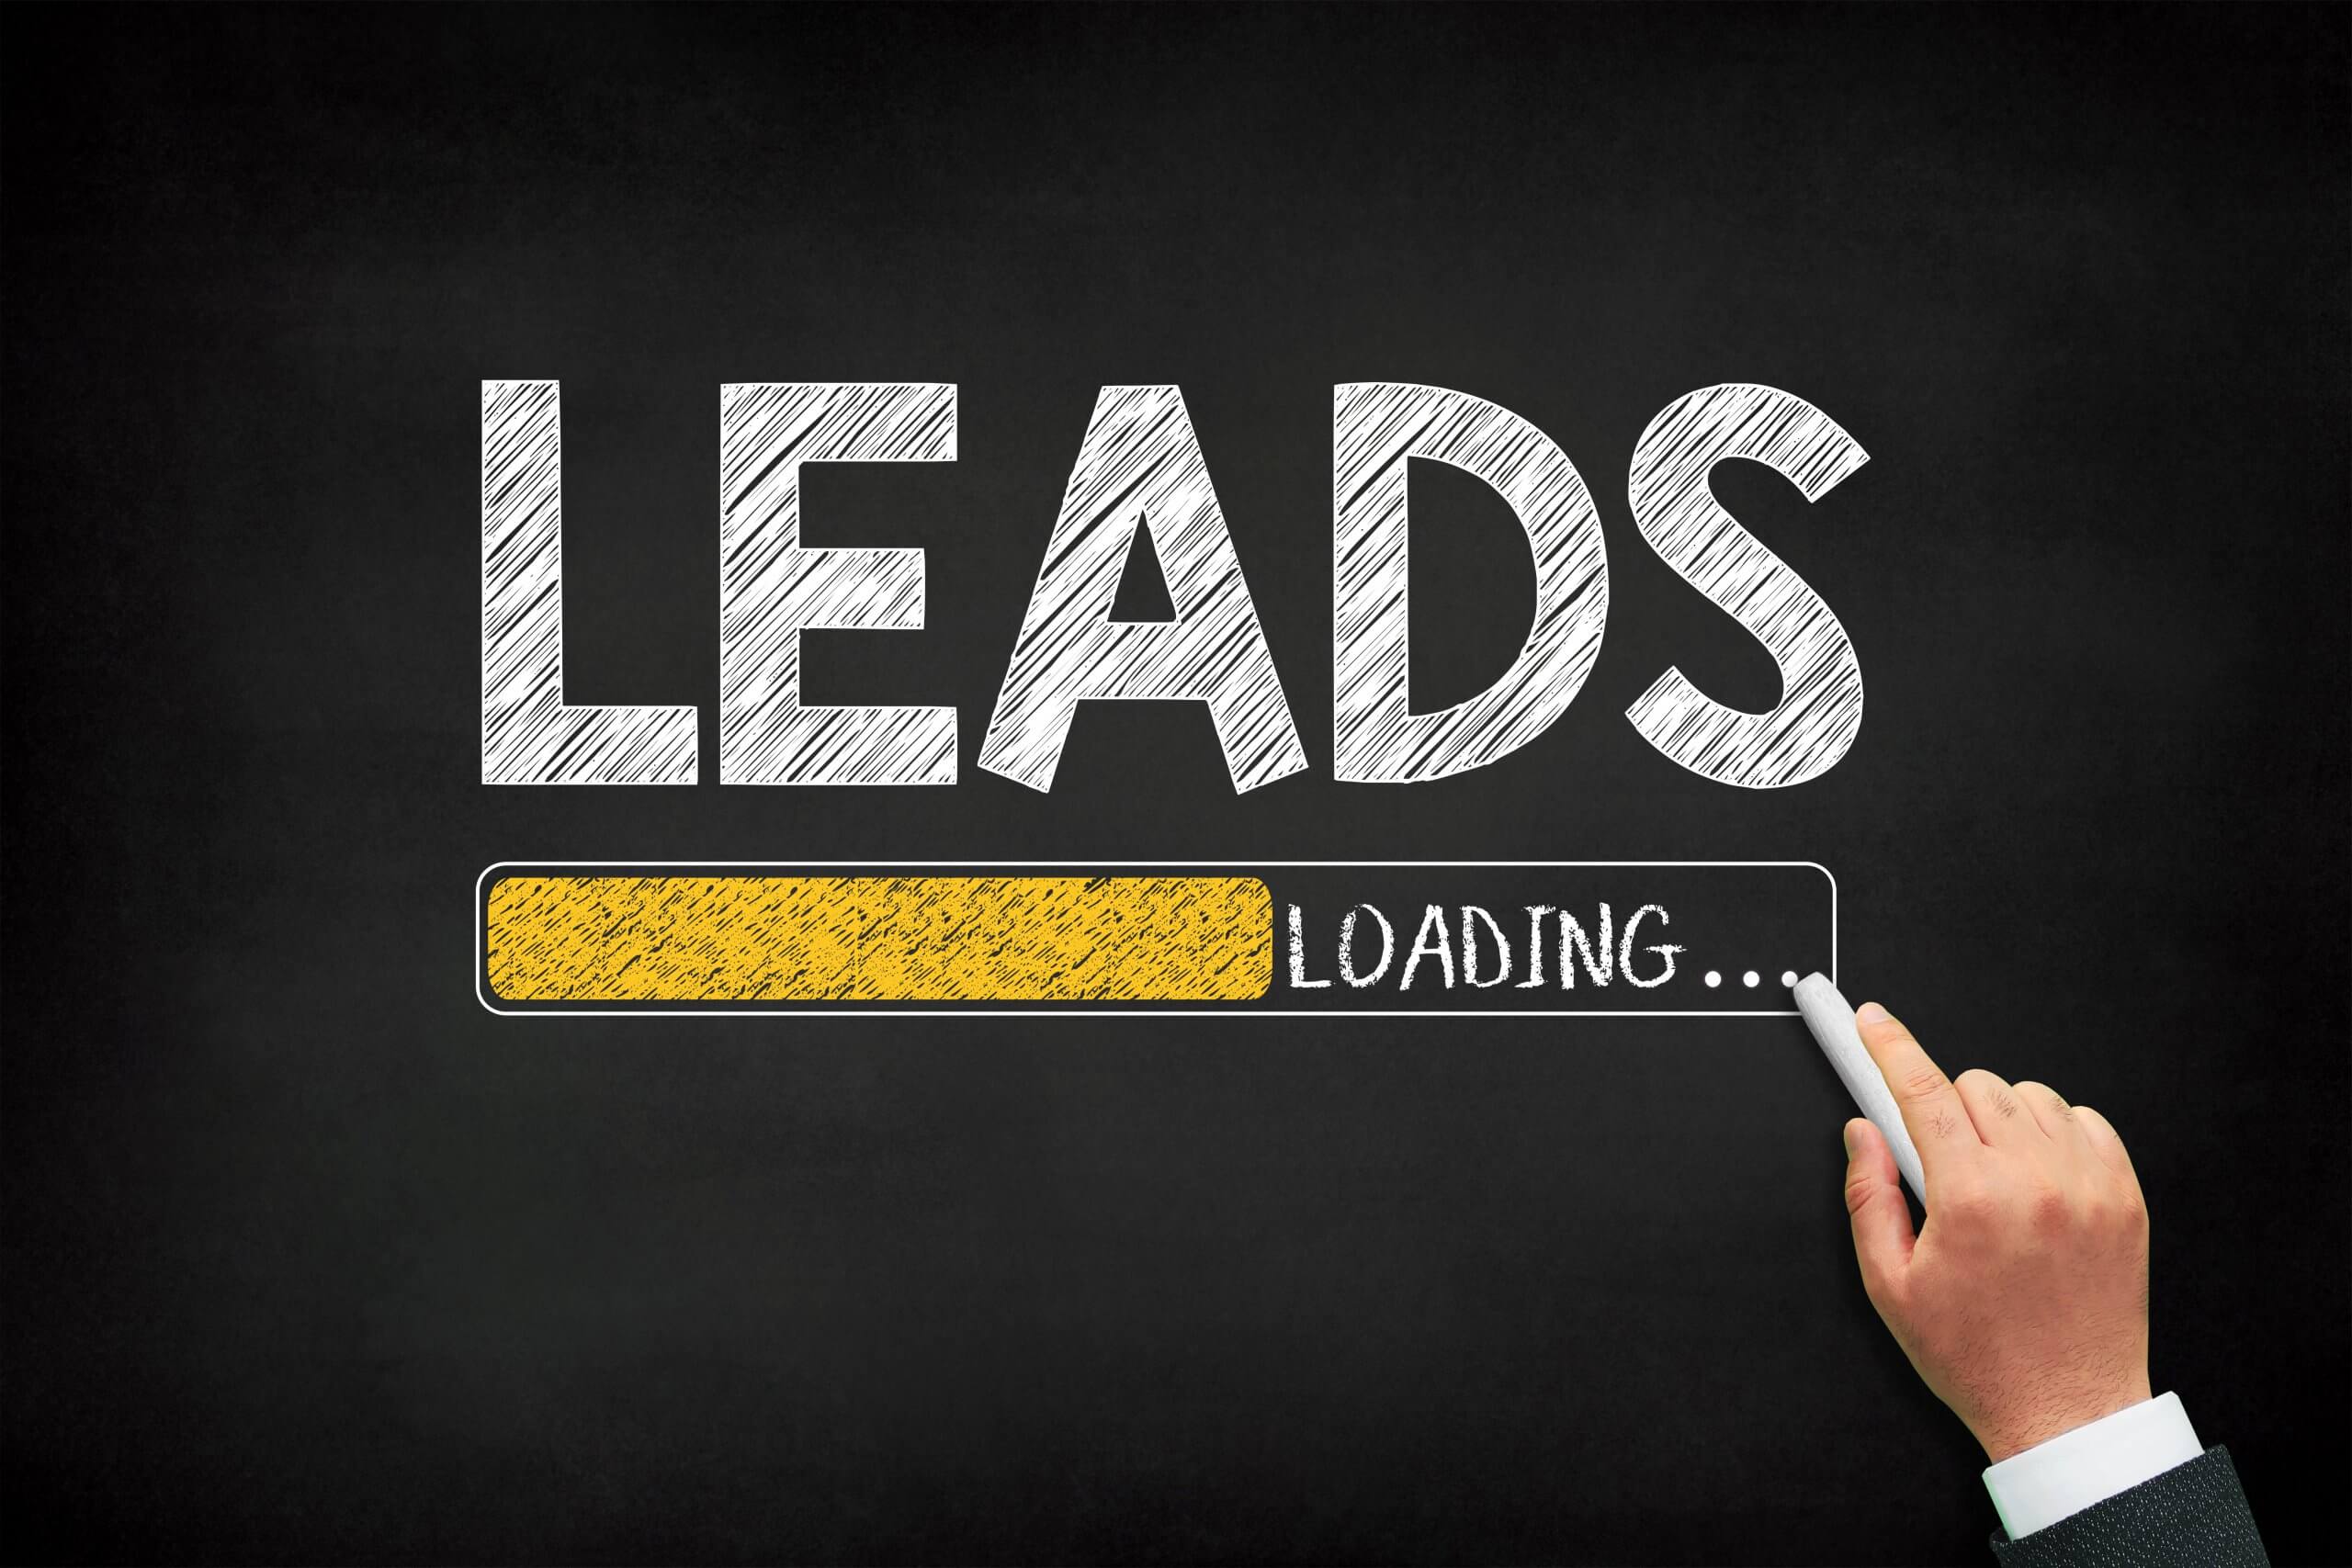 Lead Generation Services - Complete Controller